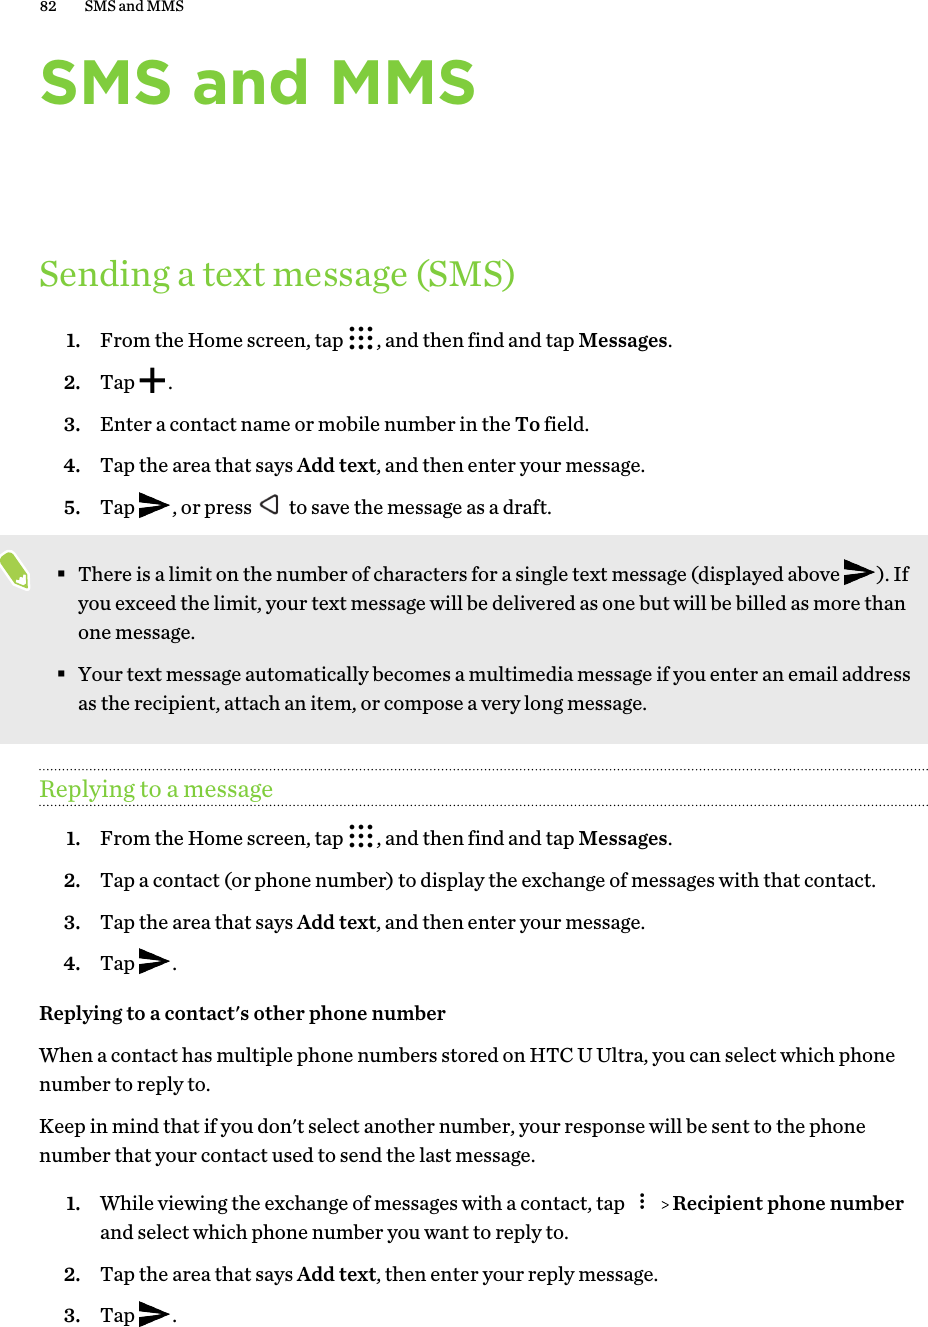 SMS and MMSSending a text message (SMS)1. From the Home screen, tap  , and then find and tap Messages.2. Tap  .3. Enter a contact name or mobile number in the To field.4. Tap the area that says Add text, and then enter your message.5. Tap  , or press   to save the message as a draft. §There is a limit on the number of characters for a single text message (displayed above  ). Ifyou exceed the limit, your text message will be delivered as one but will be billed as more thanone message.§Your text message automatically becomes a multimedia message if you enter an email addressas the recipient, attach an item, or compose a very long message.Replying to a message1. From the Home screen, tap  , and then find and tap Messages.2. Tap a contact (or phone number) to display the exchange of messages with that contact.3. Tap the area that says Add text, and then enter your message.4. Tap  .Replying to a contact&apos;s other phone numberWhen a contact has multiple phone numbers stored on HTC U Ultra, you can select which phonenumber to reply to.Keep in mind that if you don&apos;t select another number, your response will be sent to the phonenumber that your contact used to send the last message.1. While viewing the exchange of messages with a contact, tap     Recipient phone numberand select which phone number you want to reply to.2. Tap the area that says Add text, then enter your reply message.3. Tap  .82 SMS and MMS